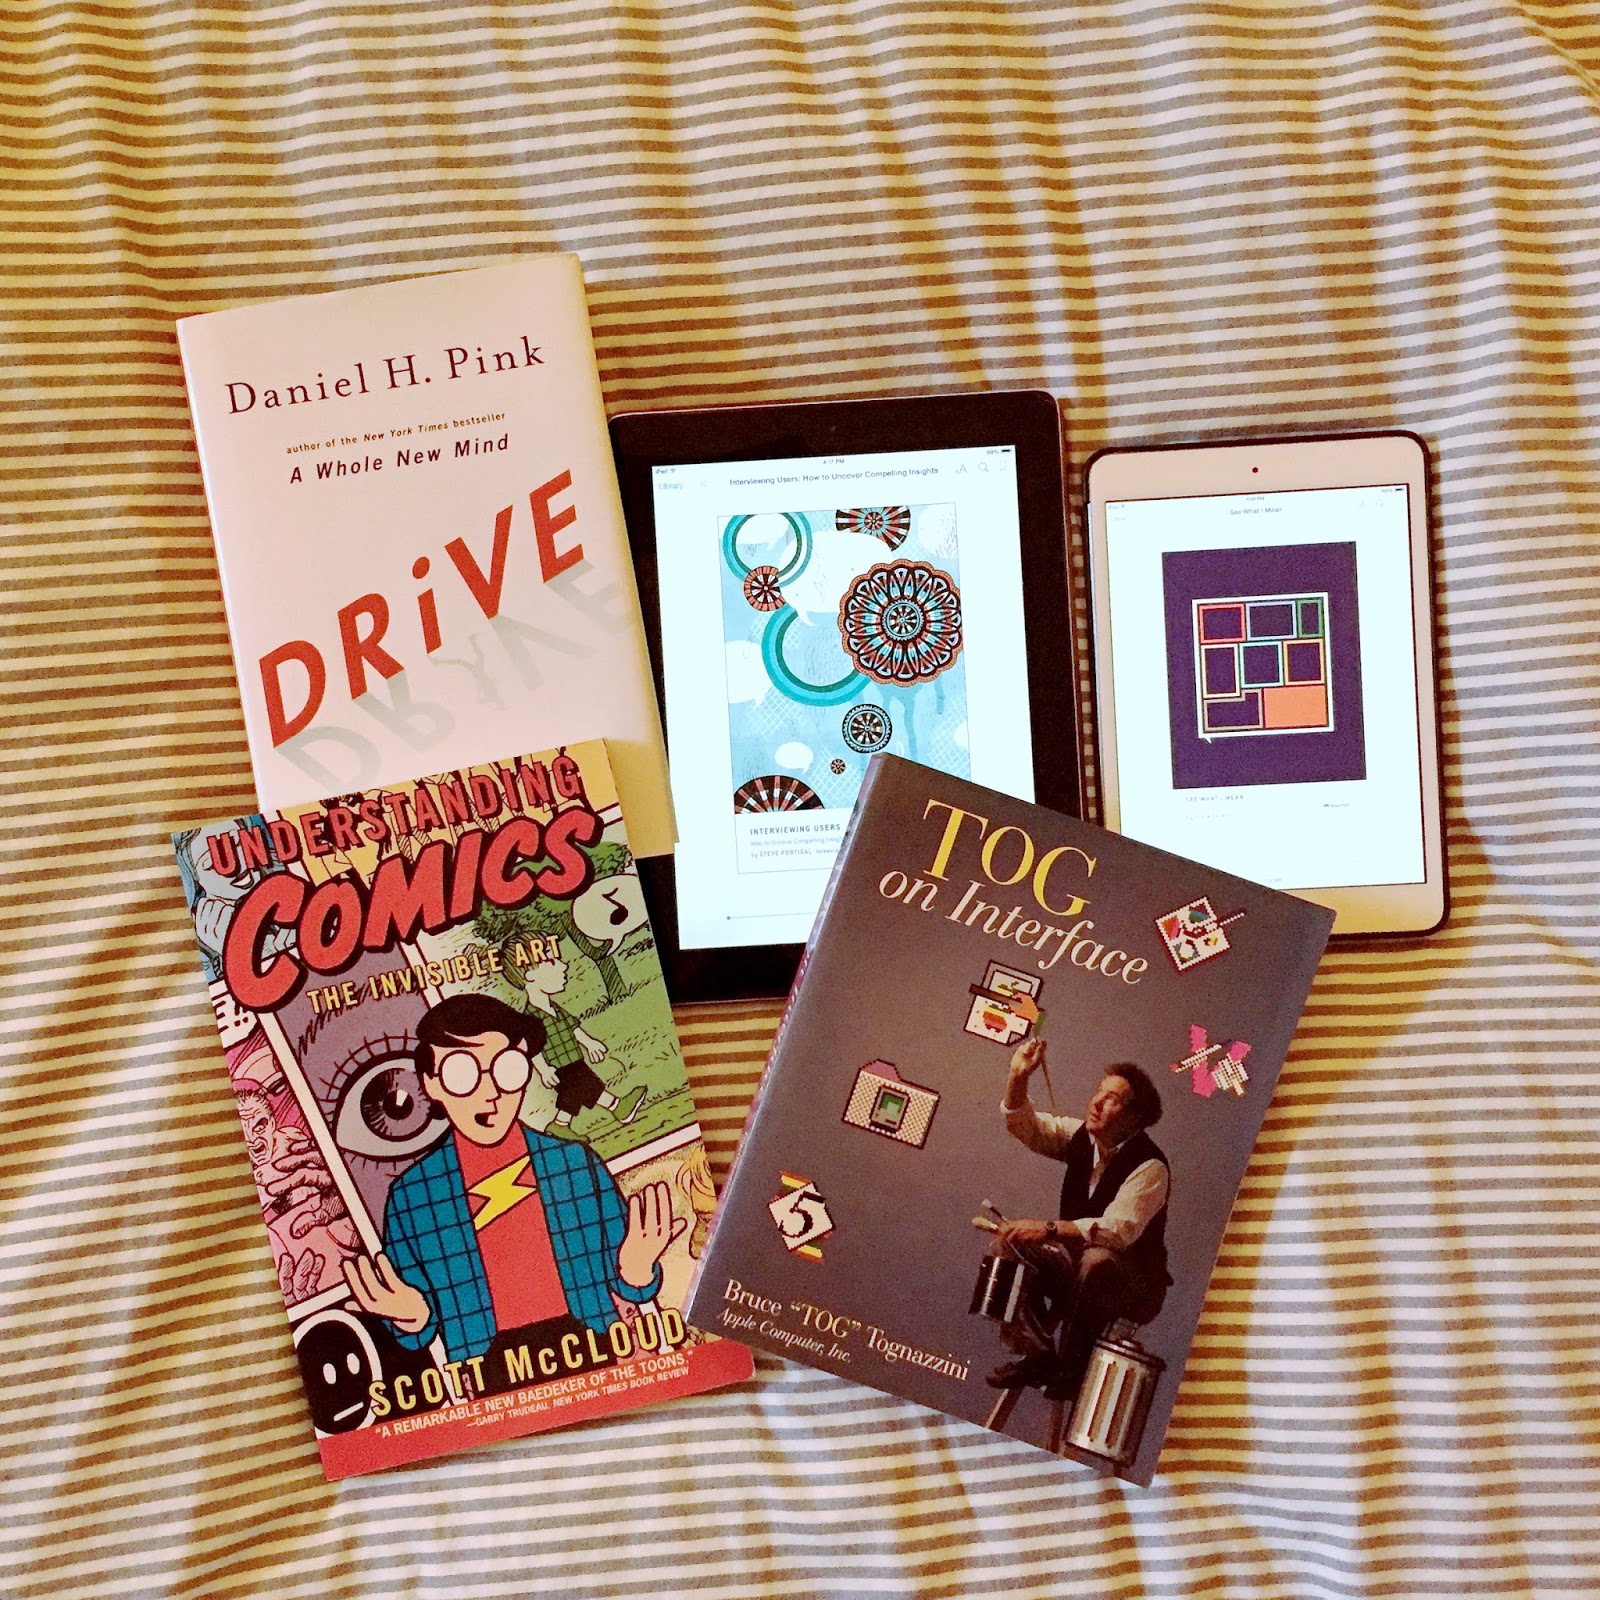 5 Books: ‘Drive’, ‘Interviewing Users’, ‘See What I Mean’, ‘Understanding Comics’, ‘Tog on Interface’